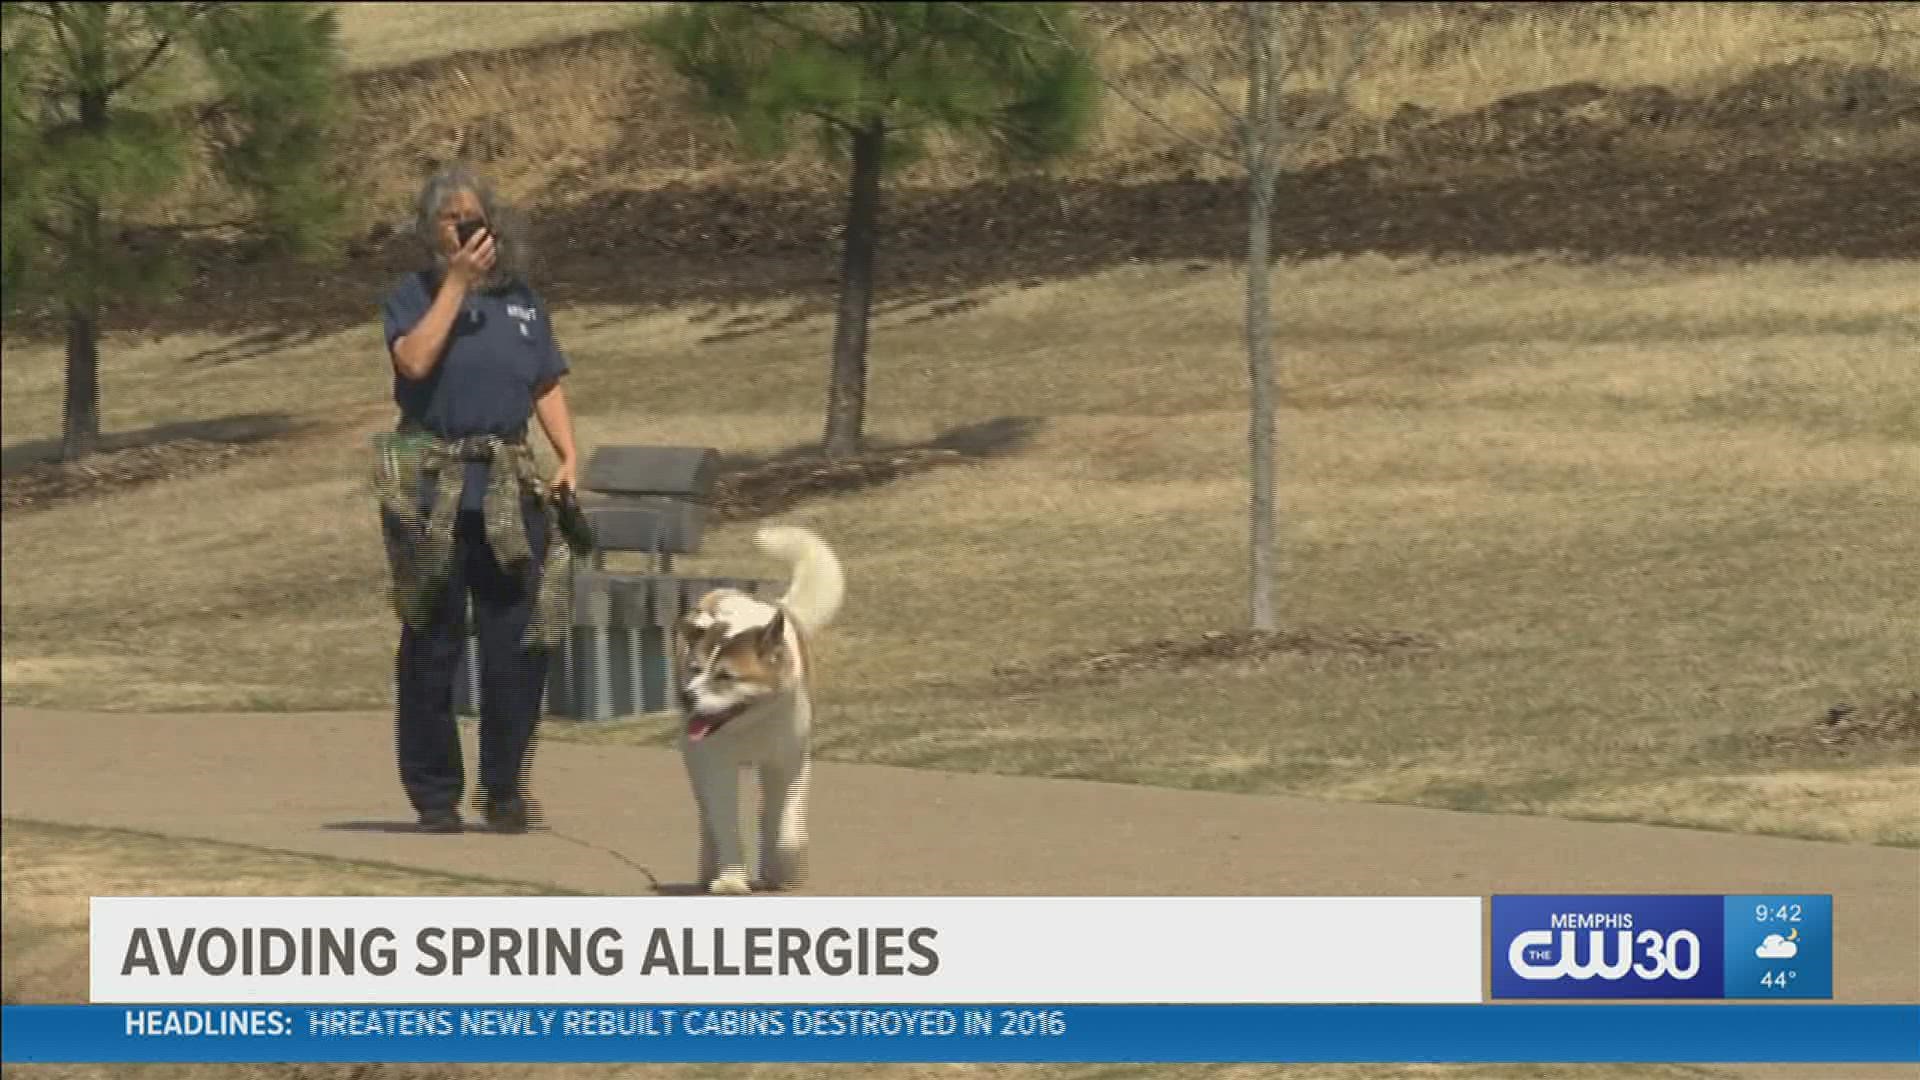 For some people with spring allergies, it's not just blooming season, it's sneezing season.